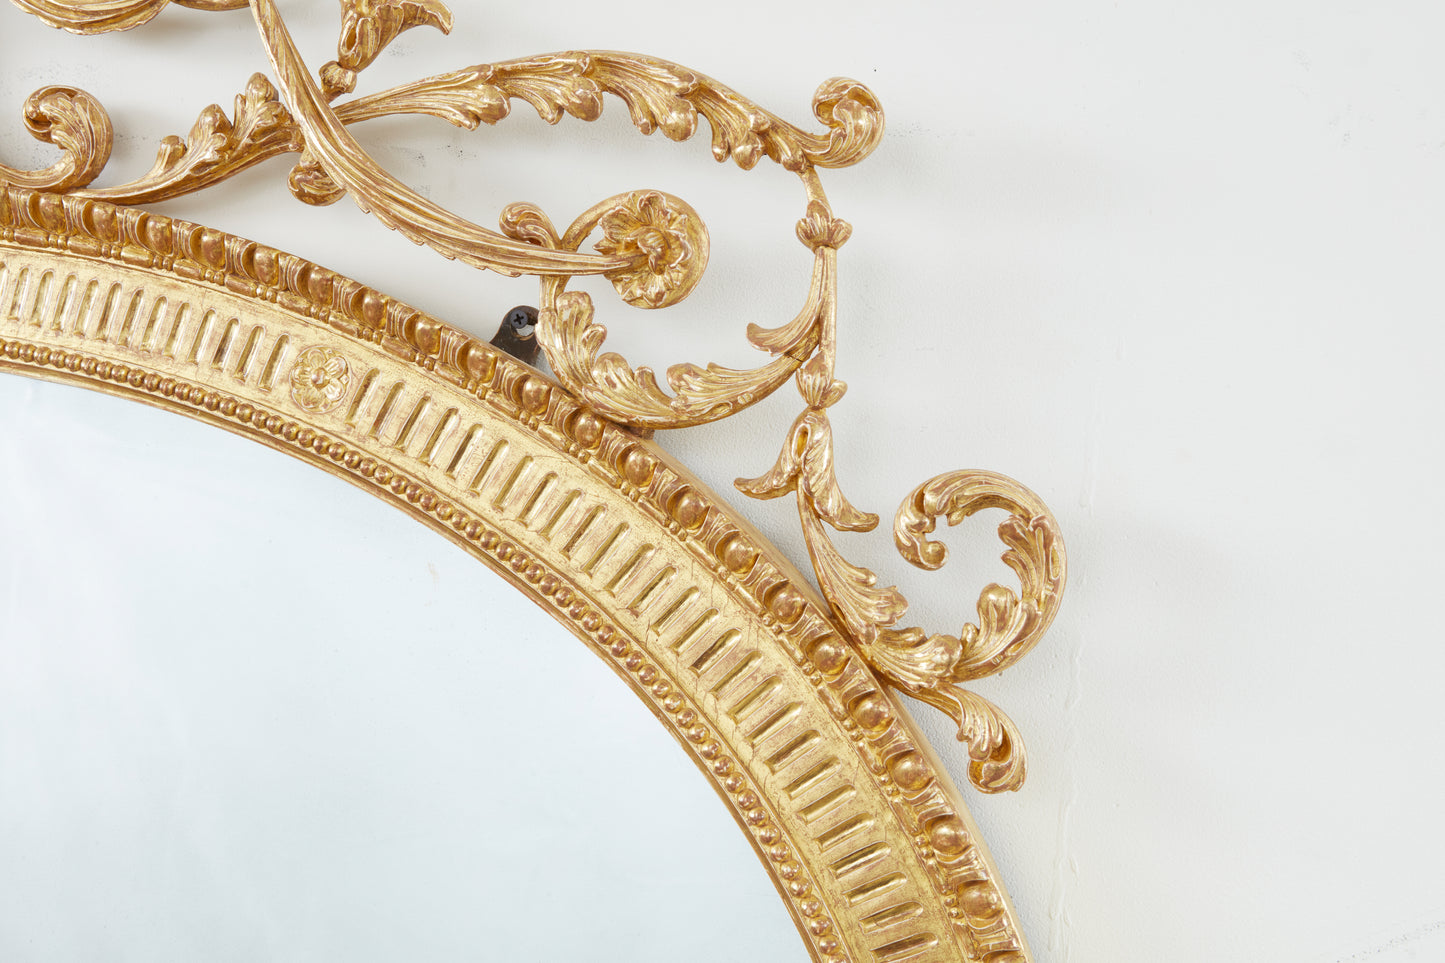 A CARVED AND GILDED NEOCLASSICAL OVERMANTEL LOOKING GLASS circa 1785